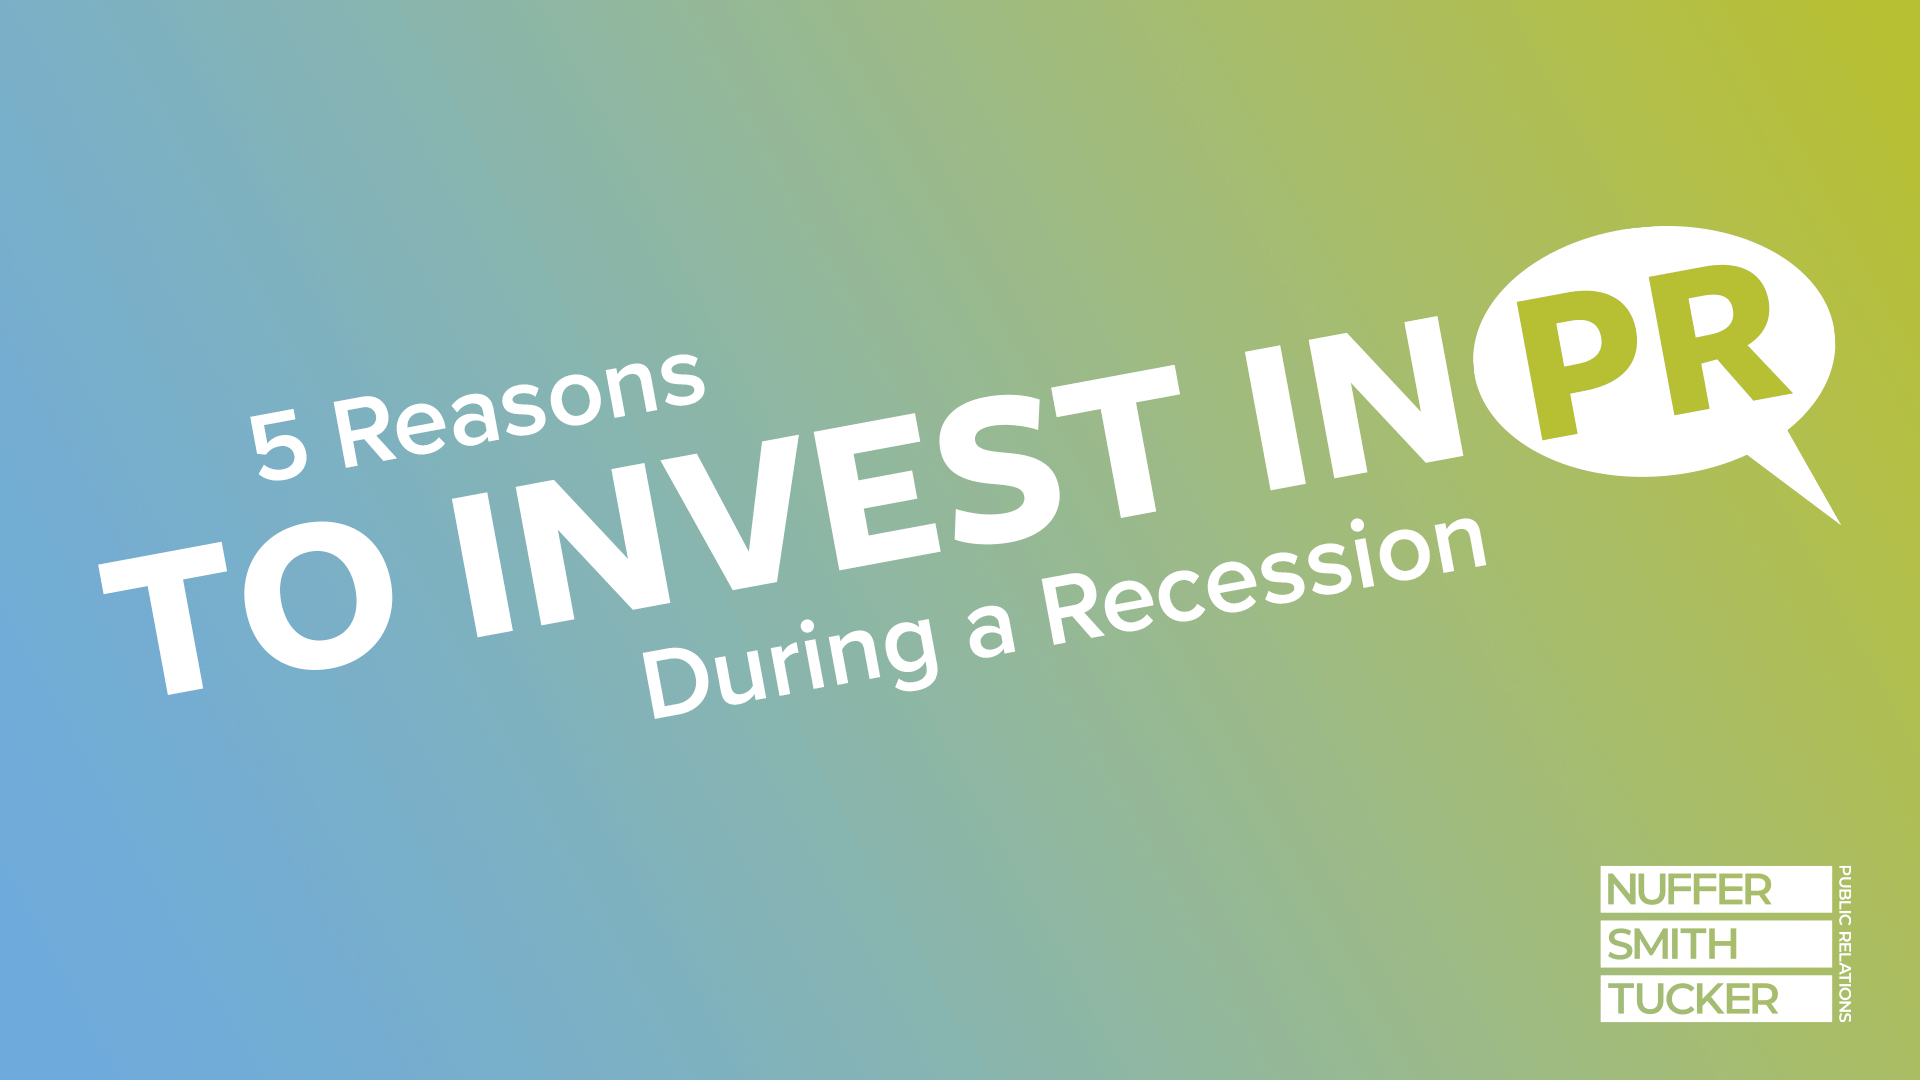 5 Reasons to Invest in PR Recession